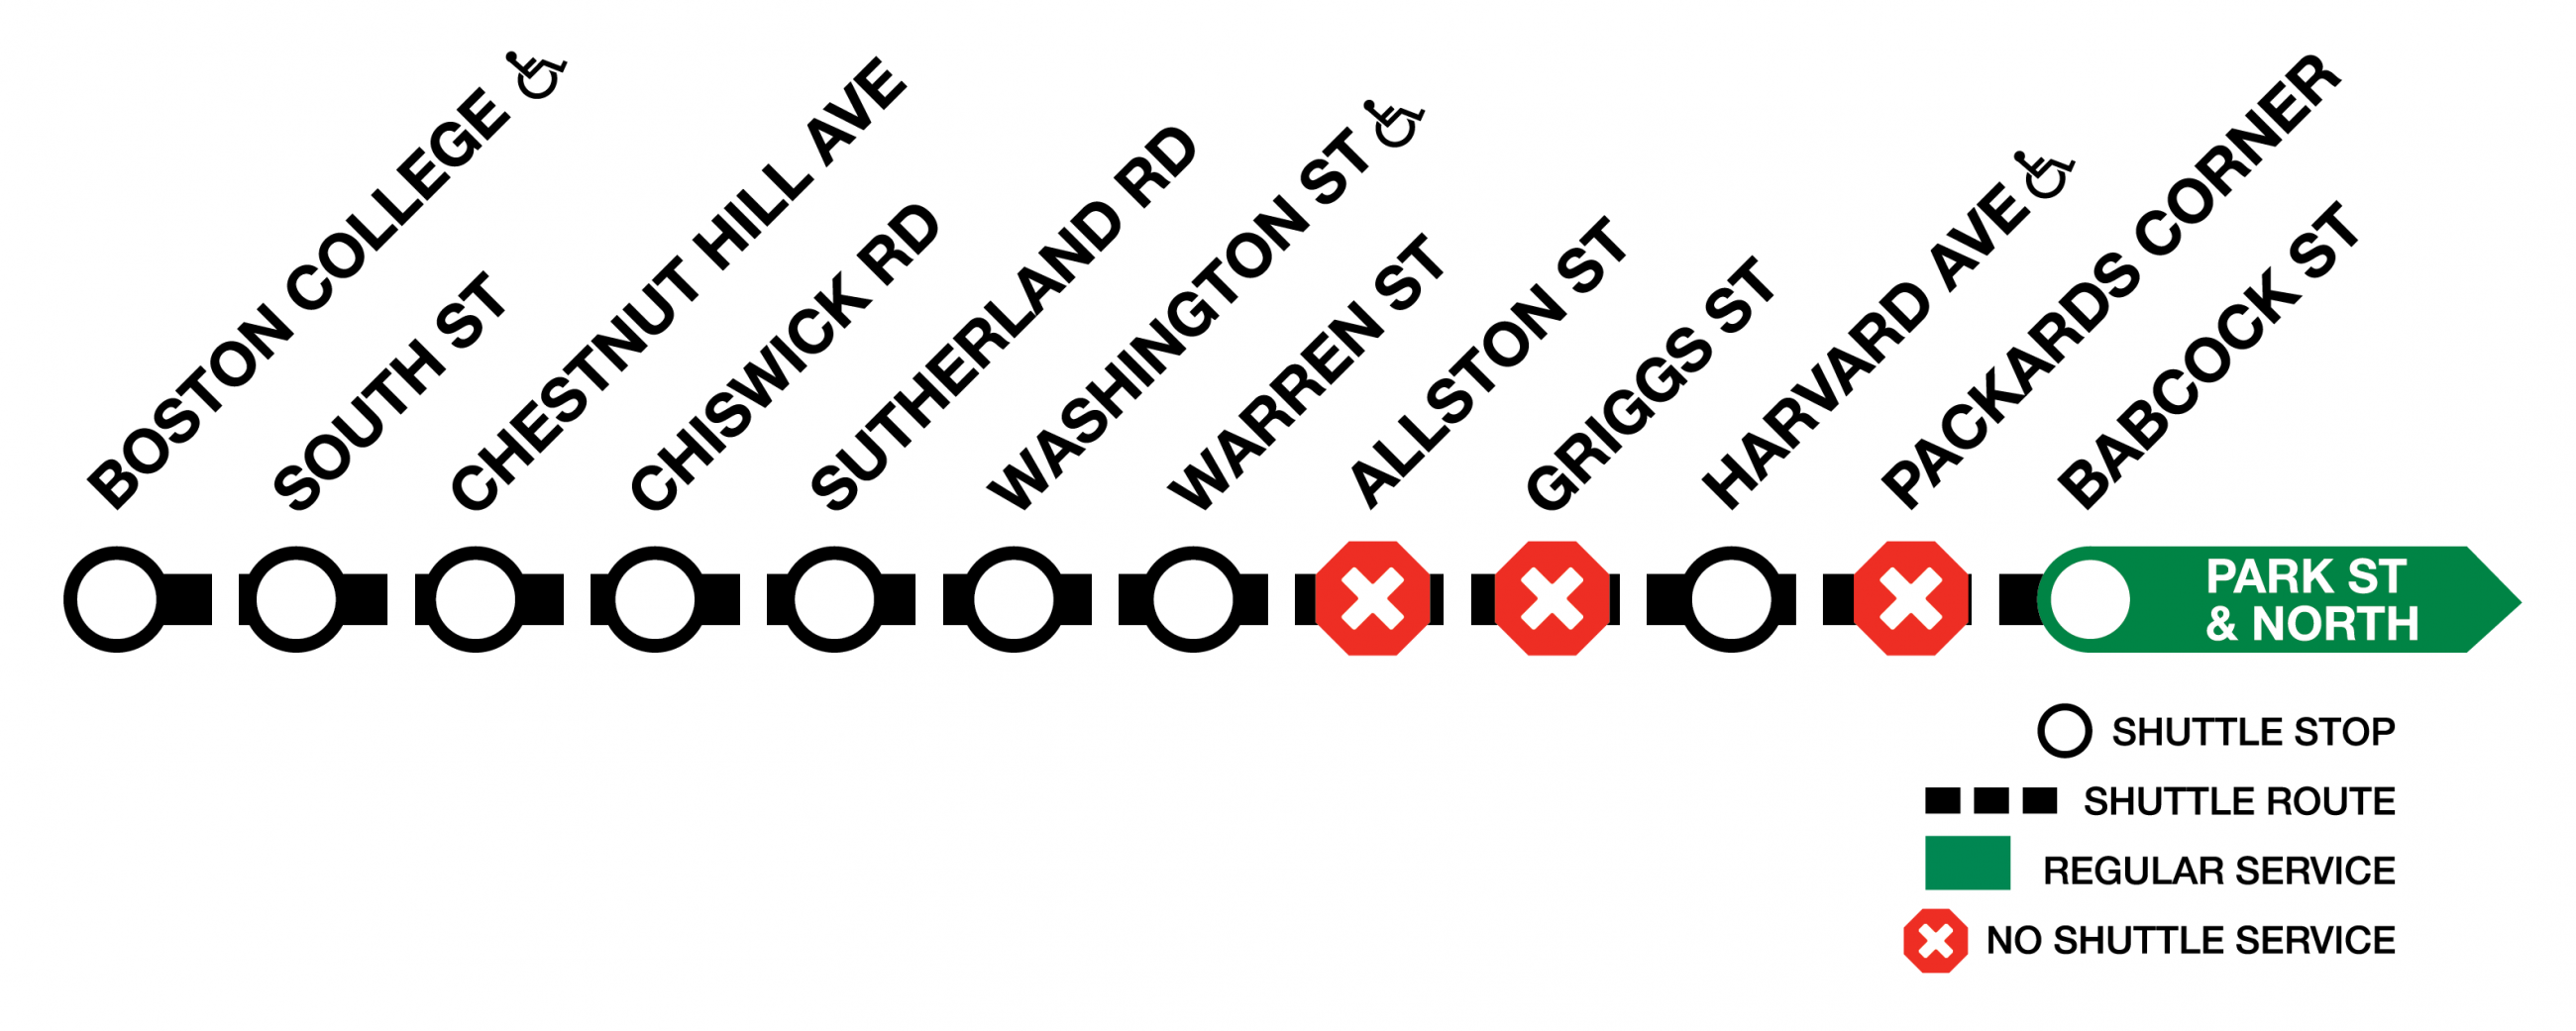 Diagram of the Green Line B branch, showing shuttle service between Boston College and Babcok St. Shuttles will skip Allston St, Griggs St, and Packards Corner